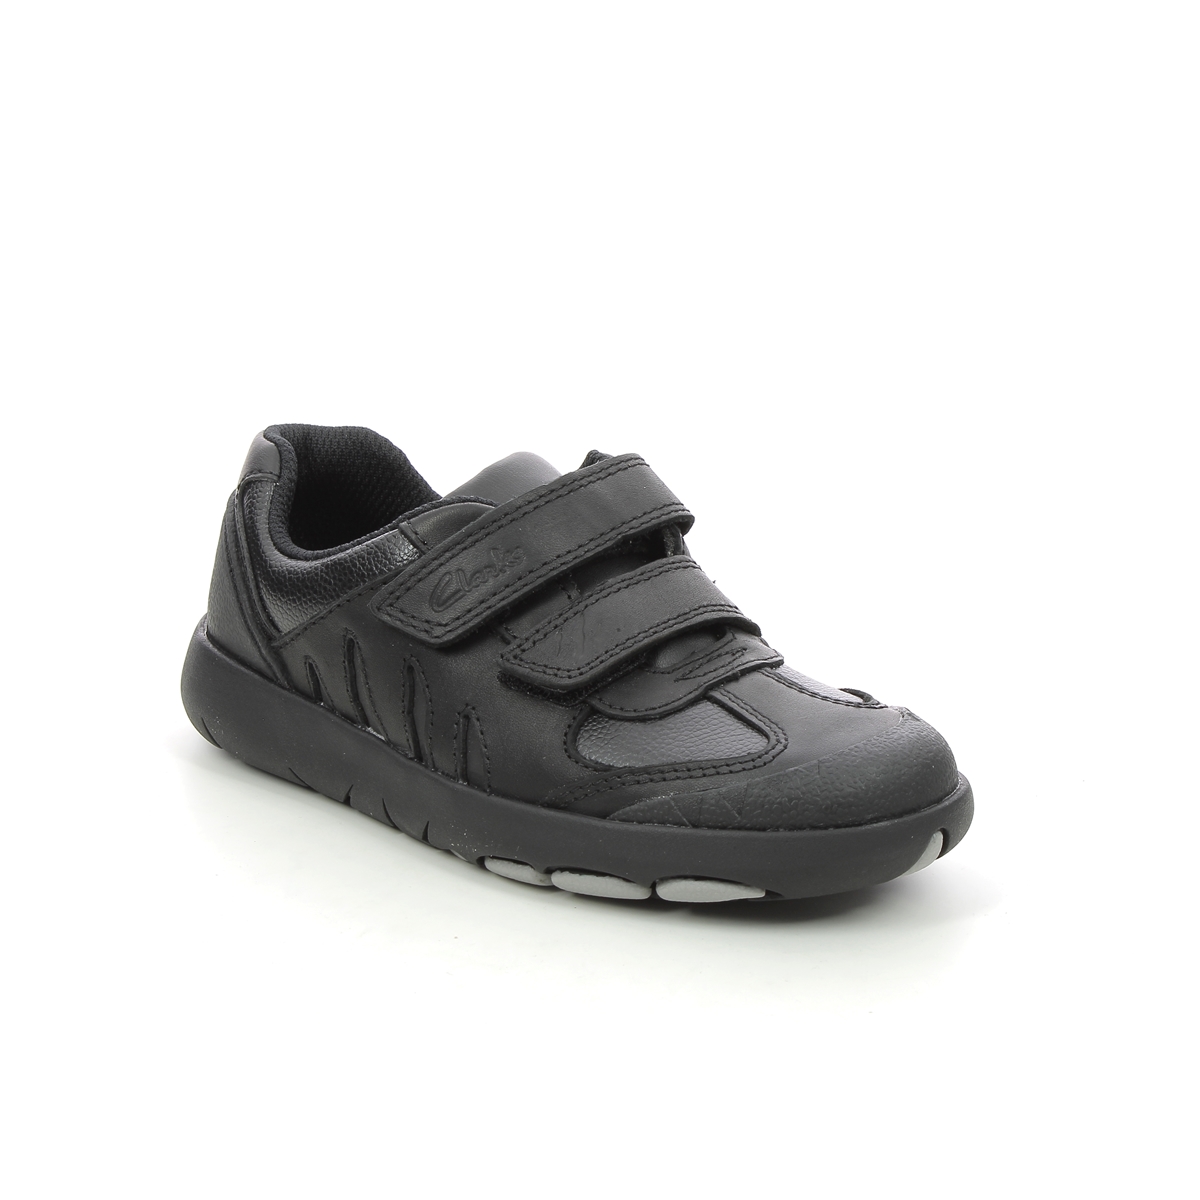 Clarks Rex Stride K Black Leather Kids Boys Shoes 626987G In Size 12 In Plain Black Leather G Width Fitting For School For kids